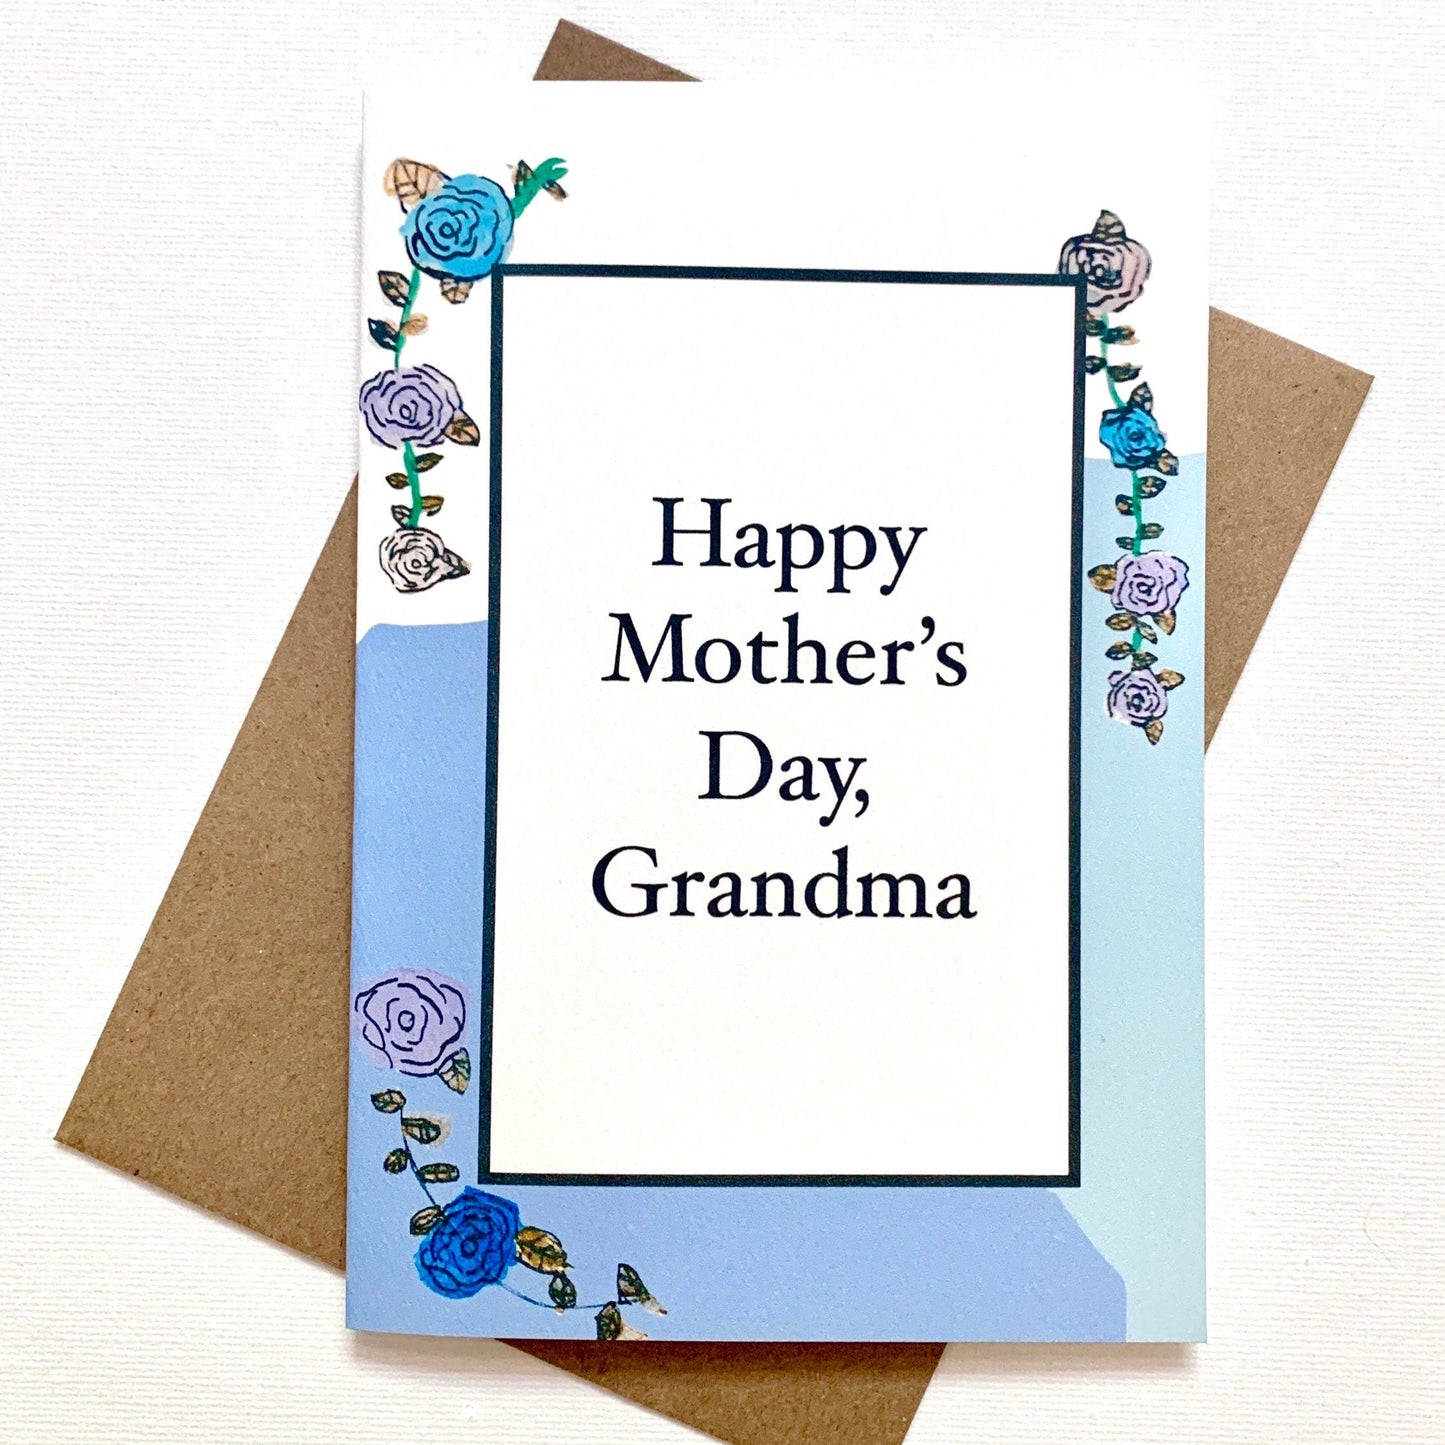 Grandma Mother's Day Greeting Card